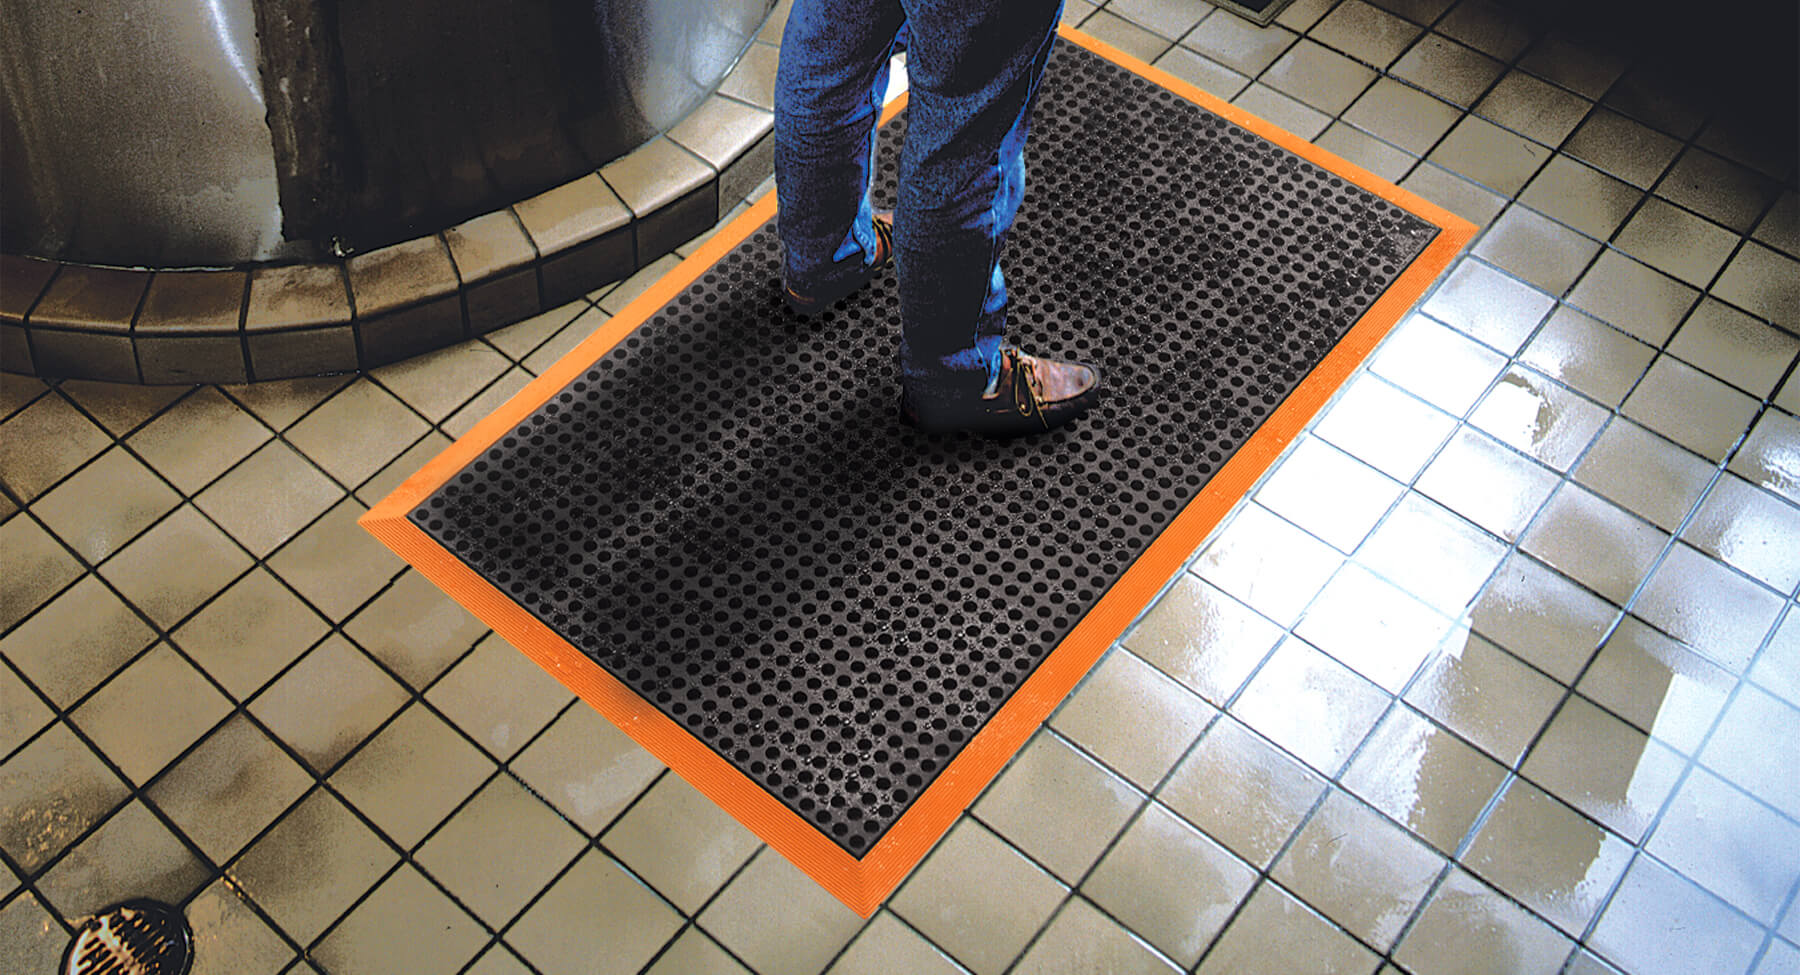 How Implementing the Right Floor Mats Can Improve Workplace Productivity   Ergonomic Flooring and Anti-fatigue Floor Mats - Surface Pros Blog by  Wearwell